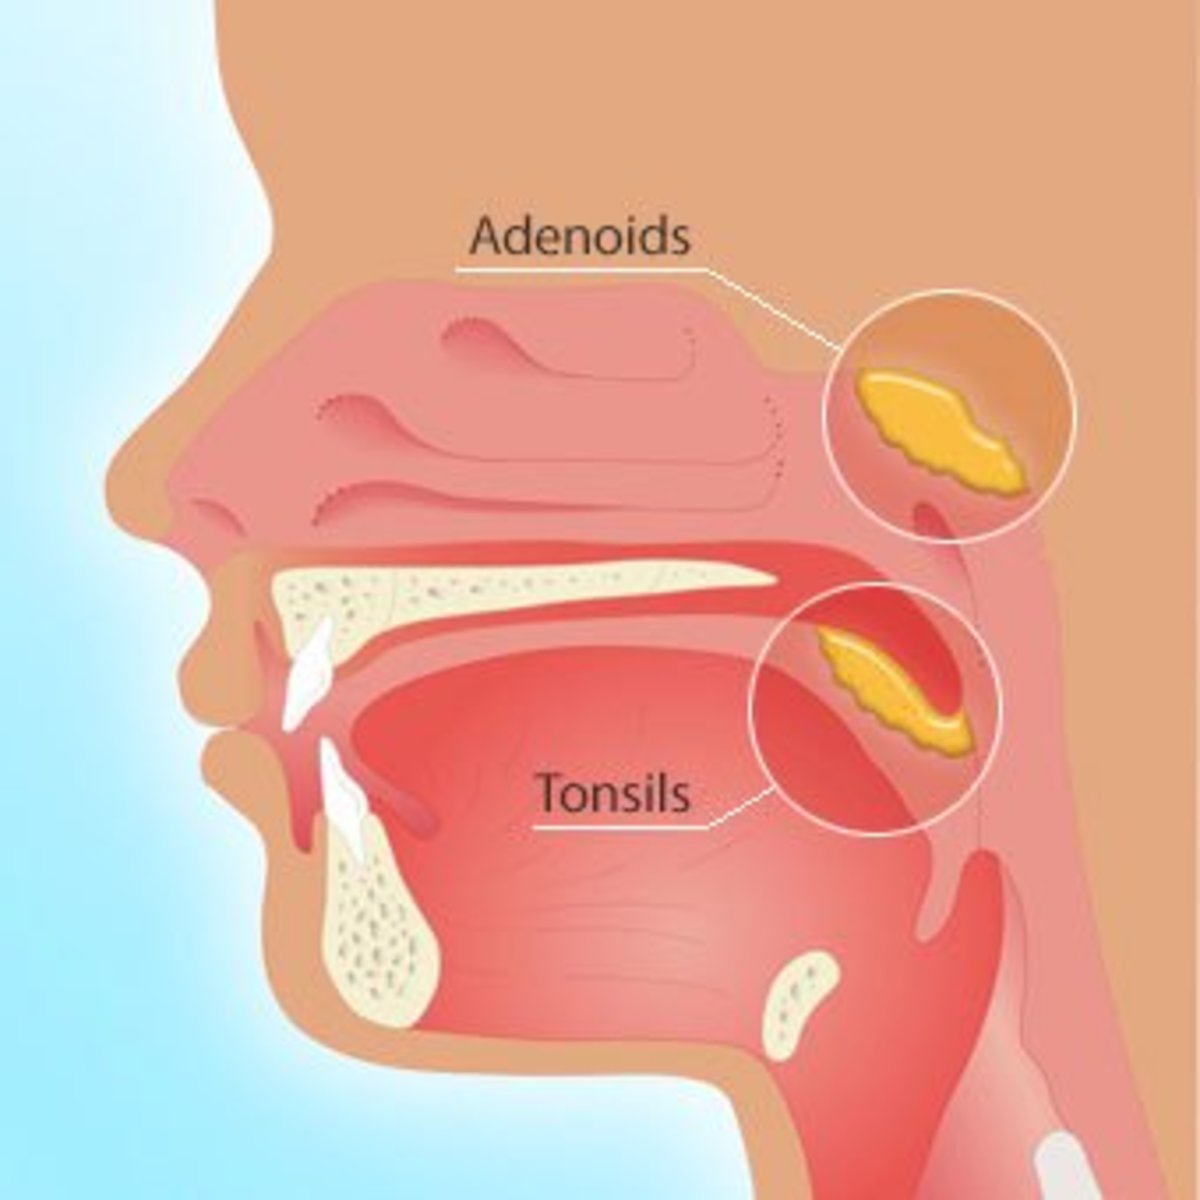 Does My Child Need Their Tonsils and Adenoids Removed? | WeHaveKids